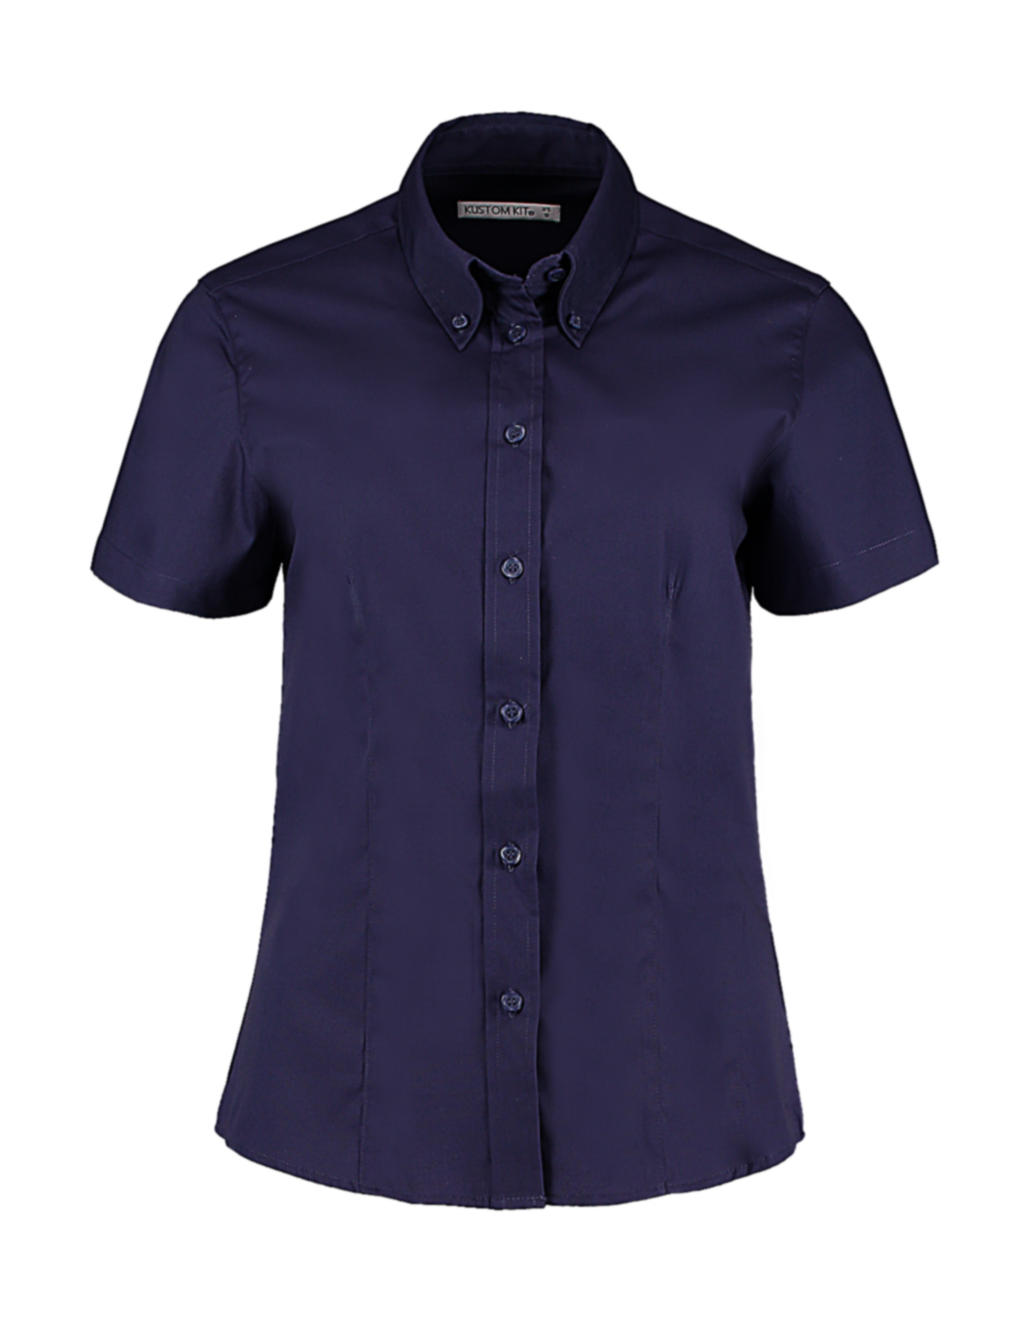  Womens Tailored Fit Premium Oxford Shirt SSL in Farbe Midnight Navy